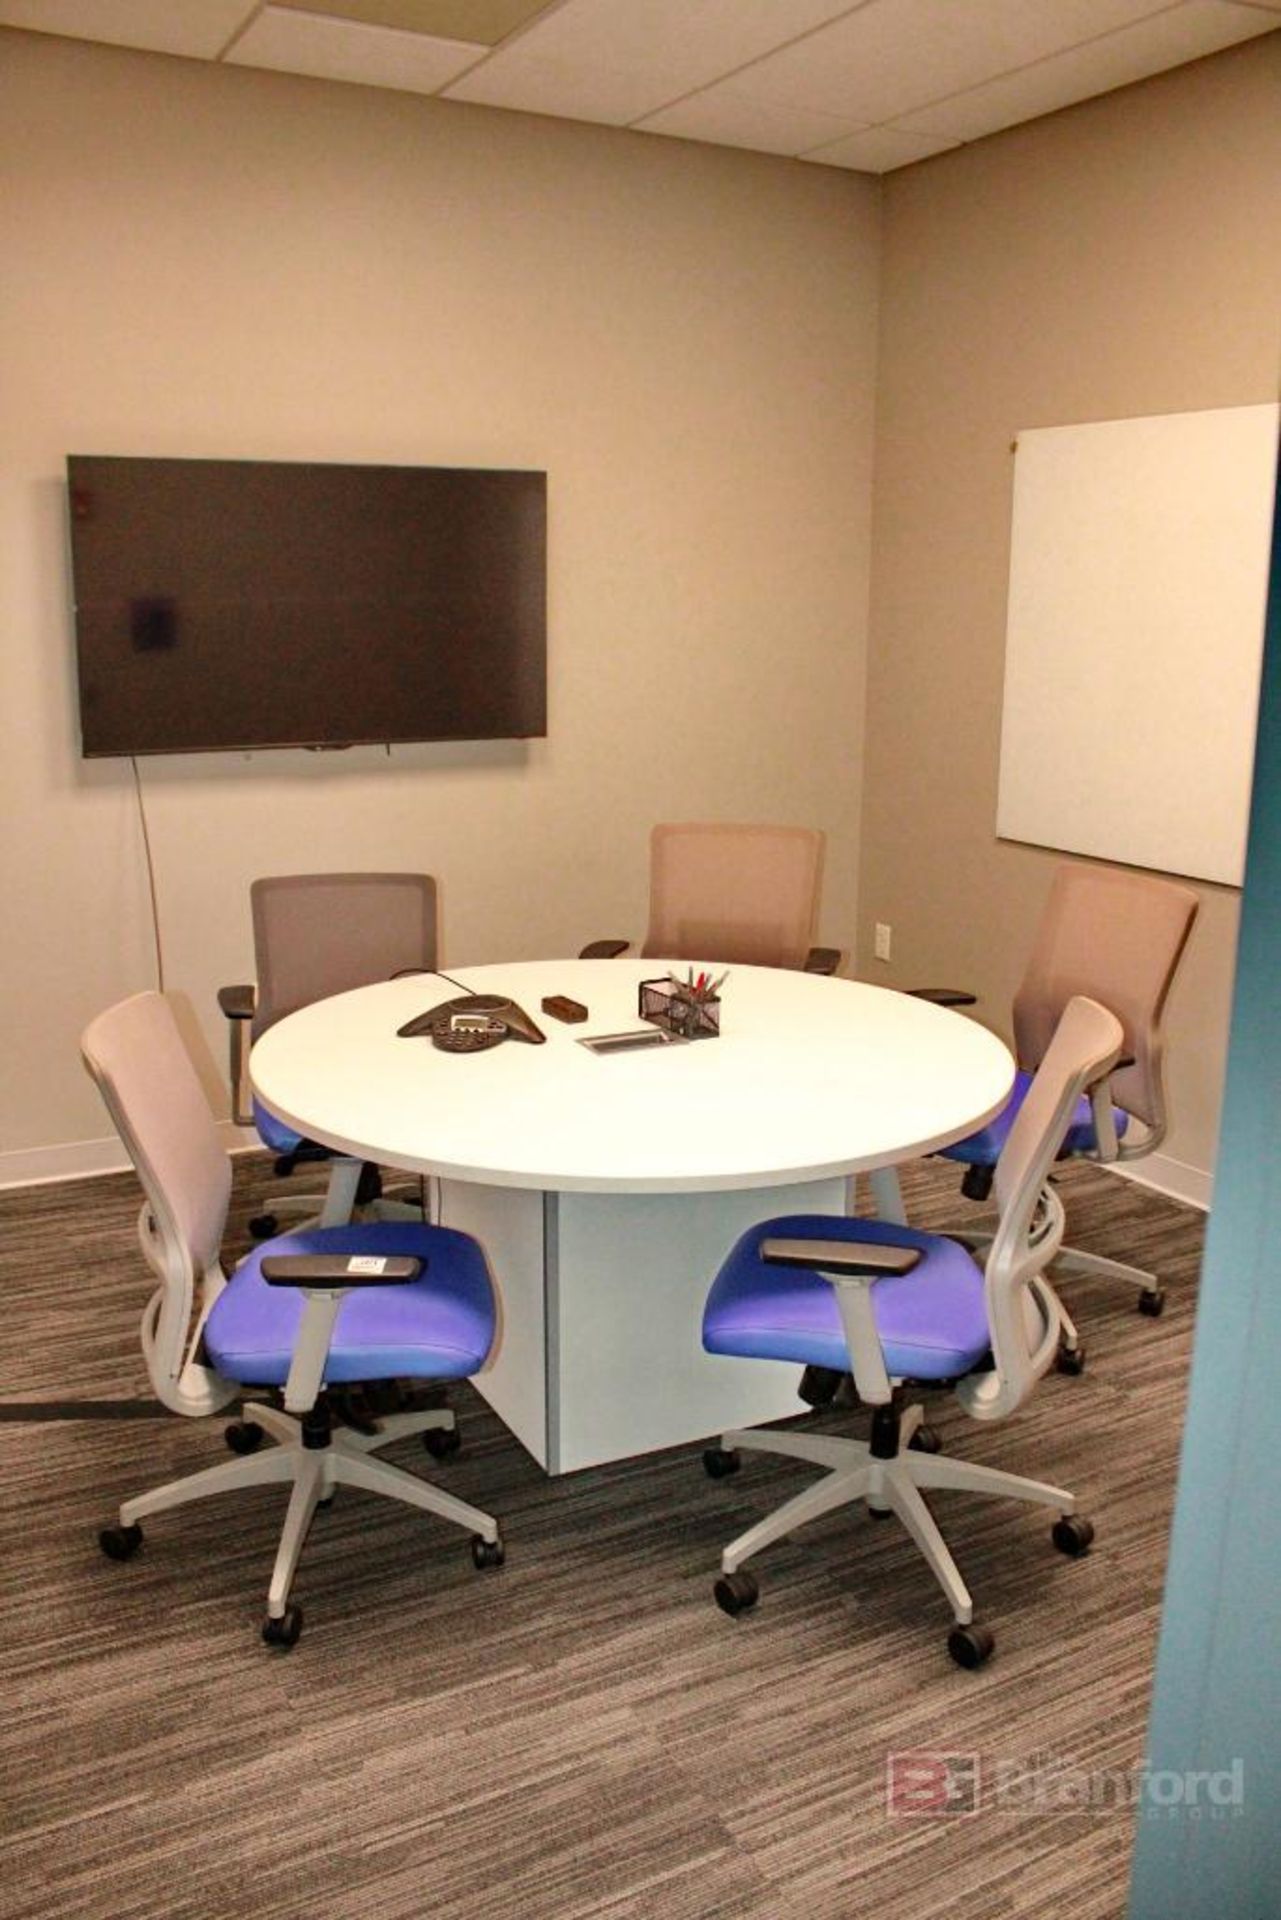 Office Area, Round Table, (5) Chairs, White Board, & Sharp Flatscreen TV - Image 2 of 4